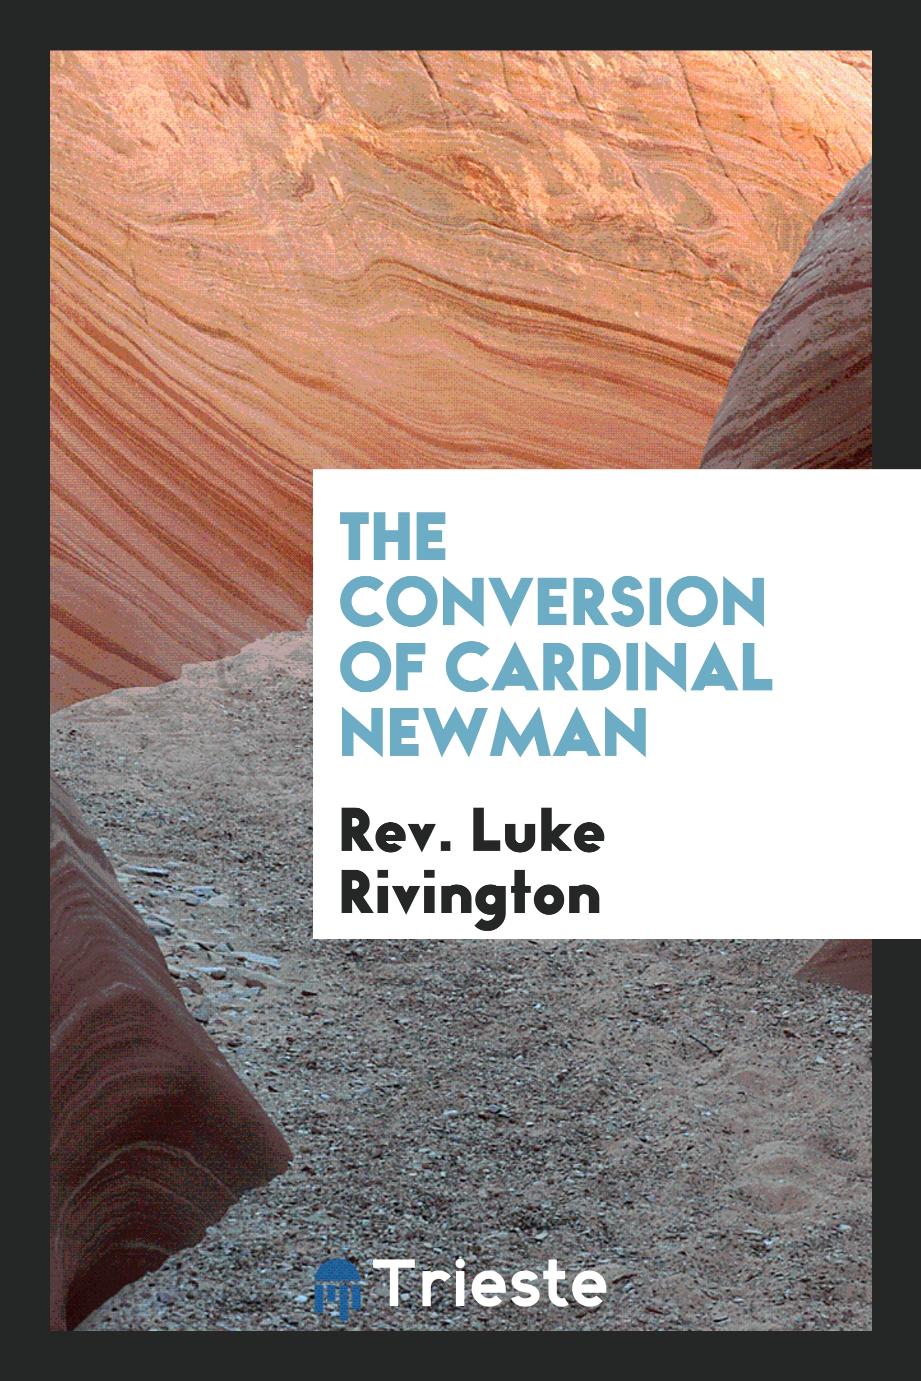 The Conversion of Cardinal Newman